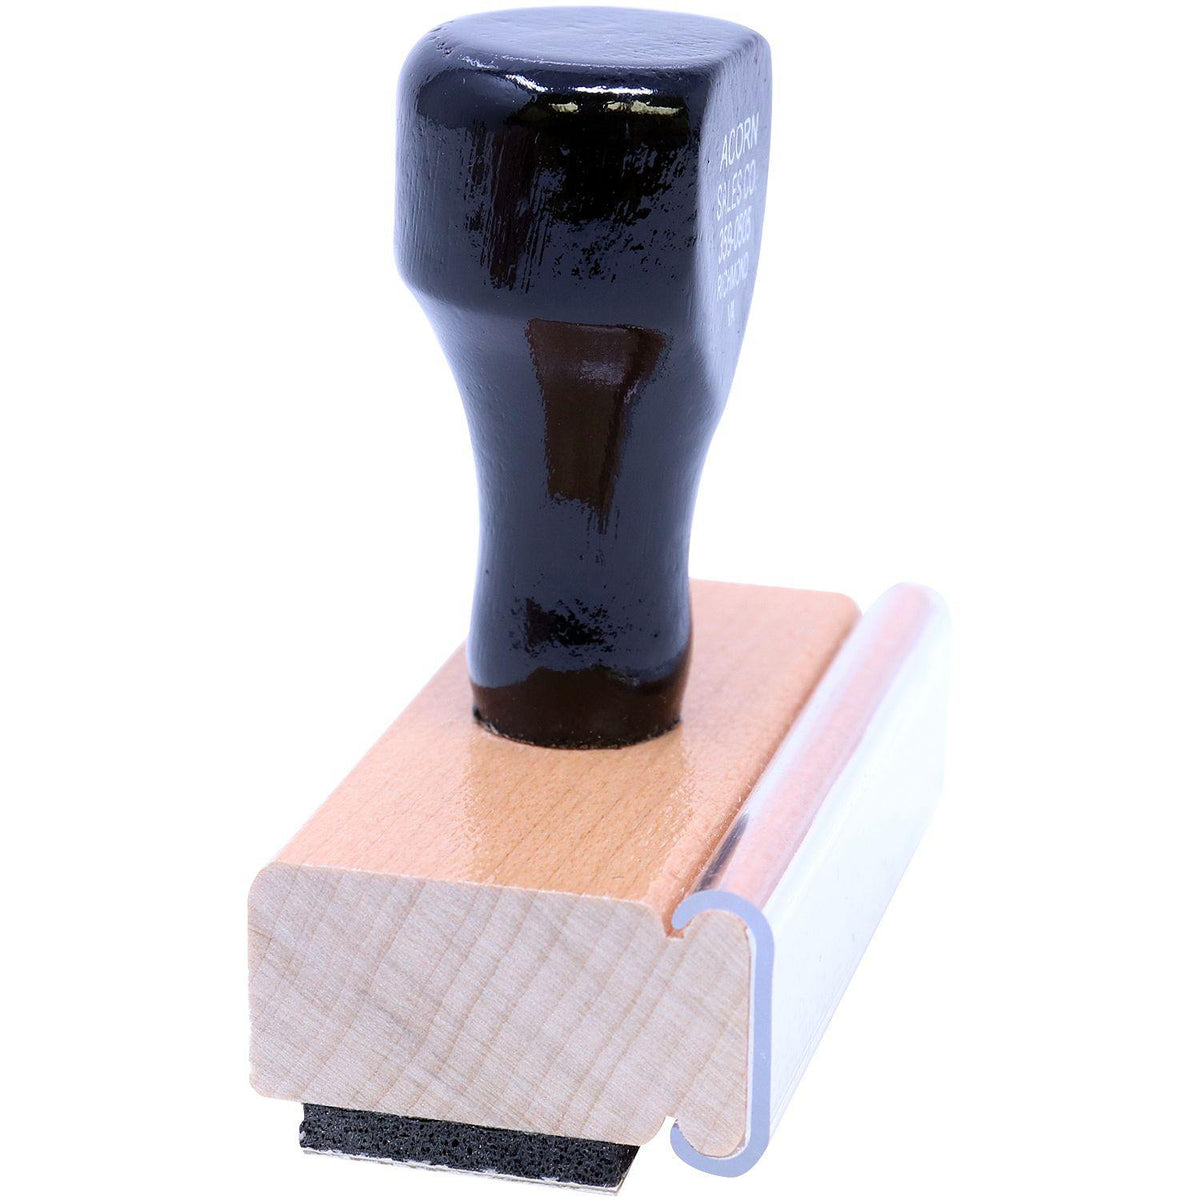 Side View of Urgente Rubber Stamp at an Angle